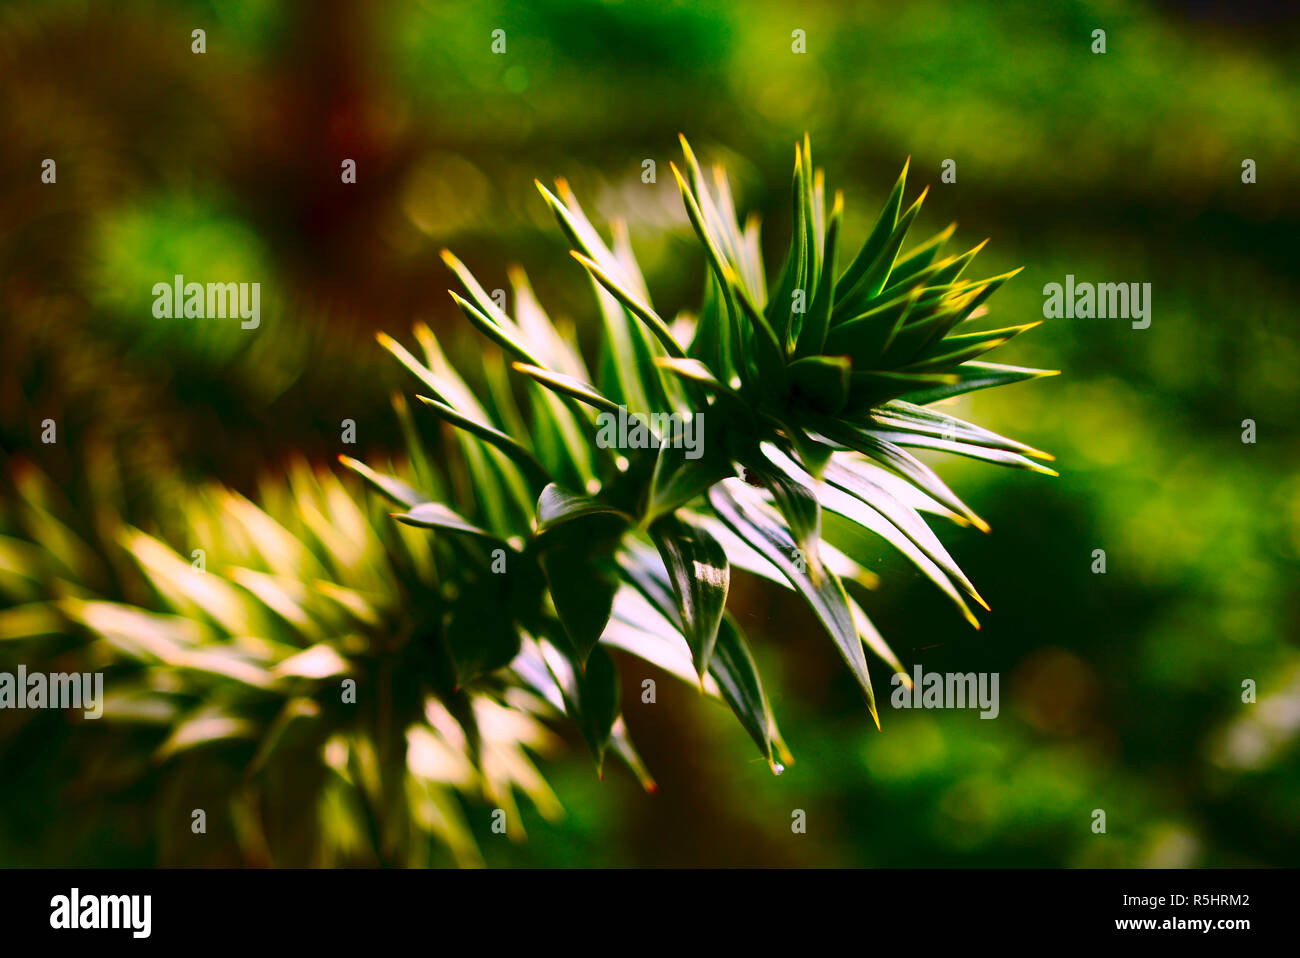 Arm of Araucaria in backlight Stock Photo